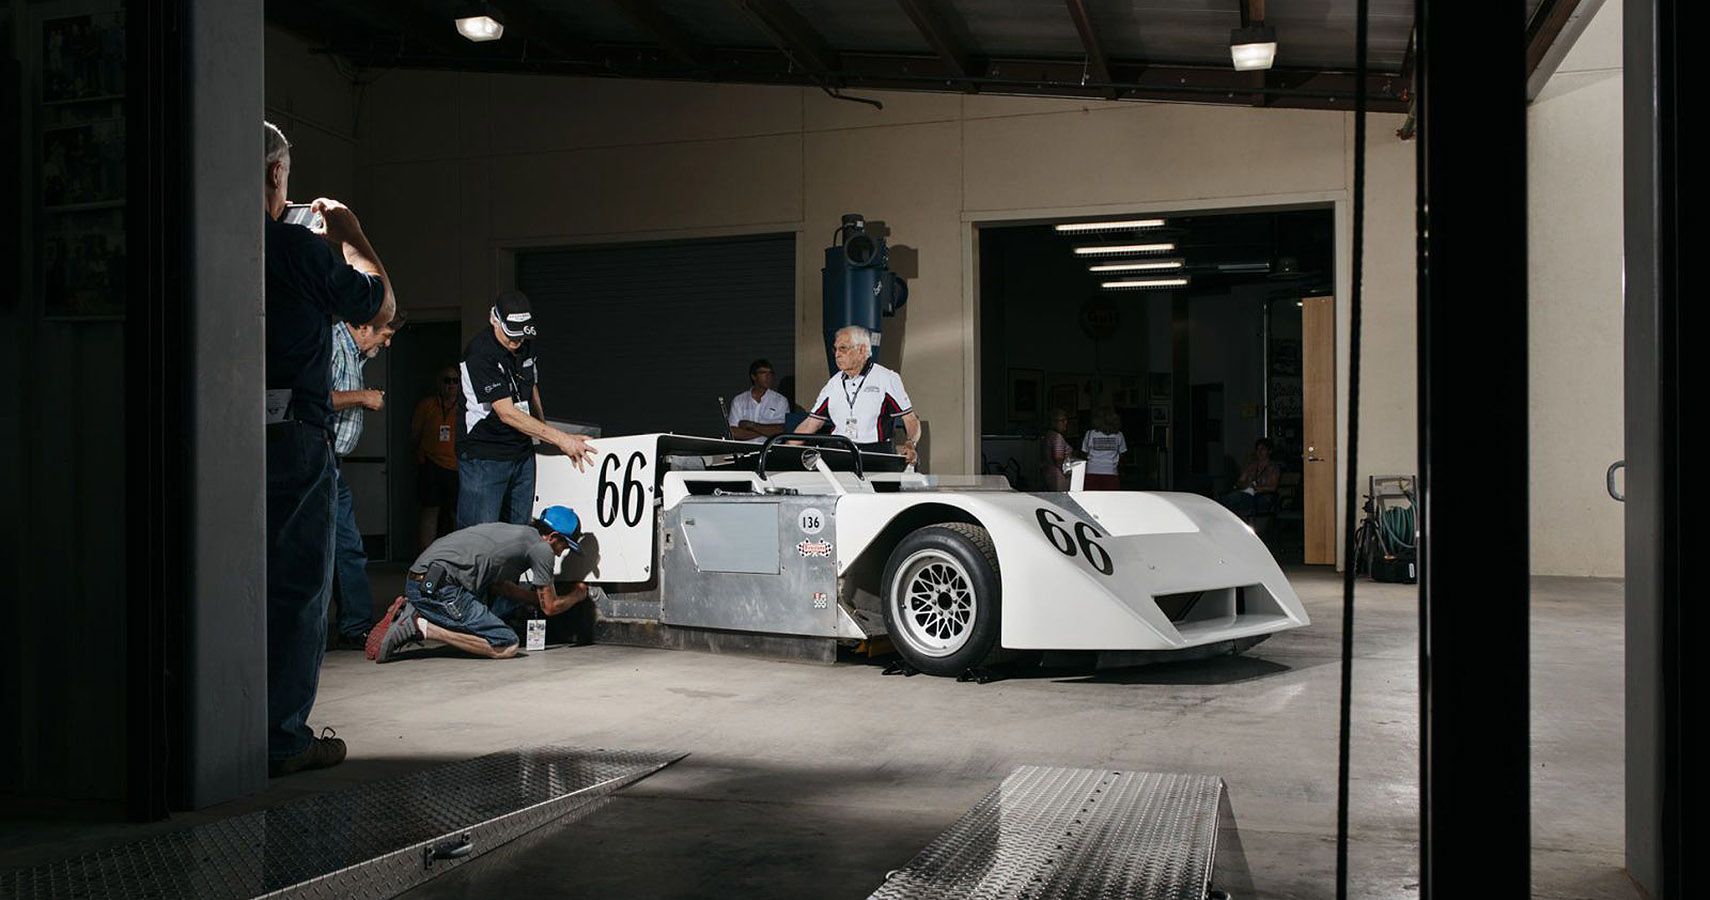 The Chaparral 2J Came Bearing An Aluminum 7.0-Liter Chevy Zl1 Engine, One That Made 650 Horses Paired With A Clutchless Semi-Automatic Three-Speed Transaxle